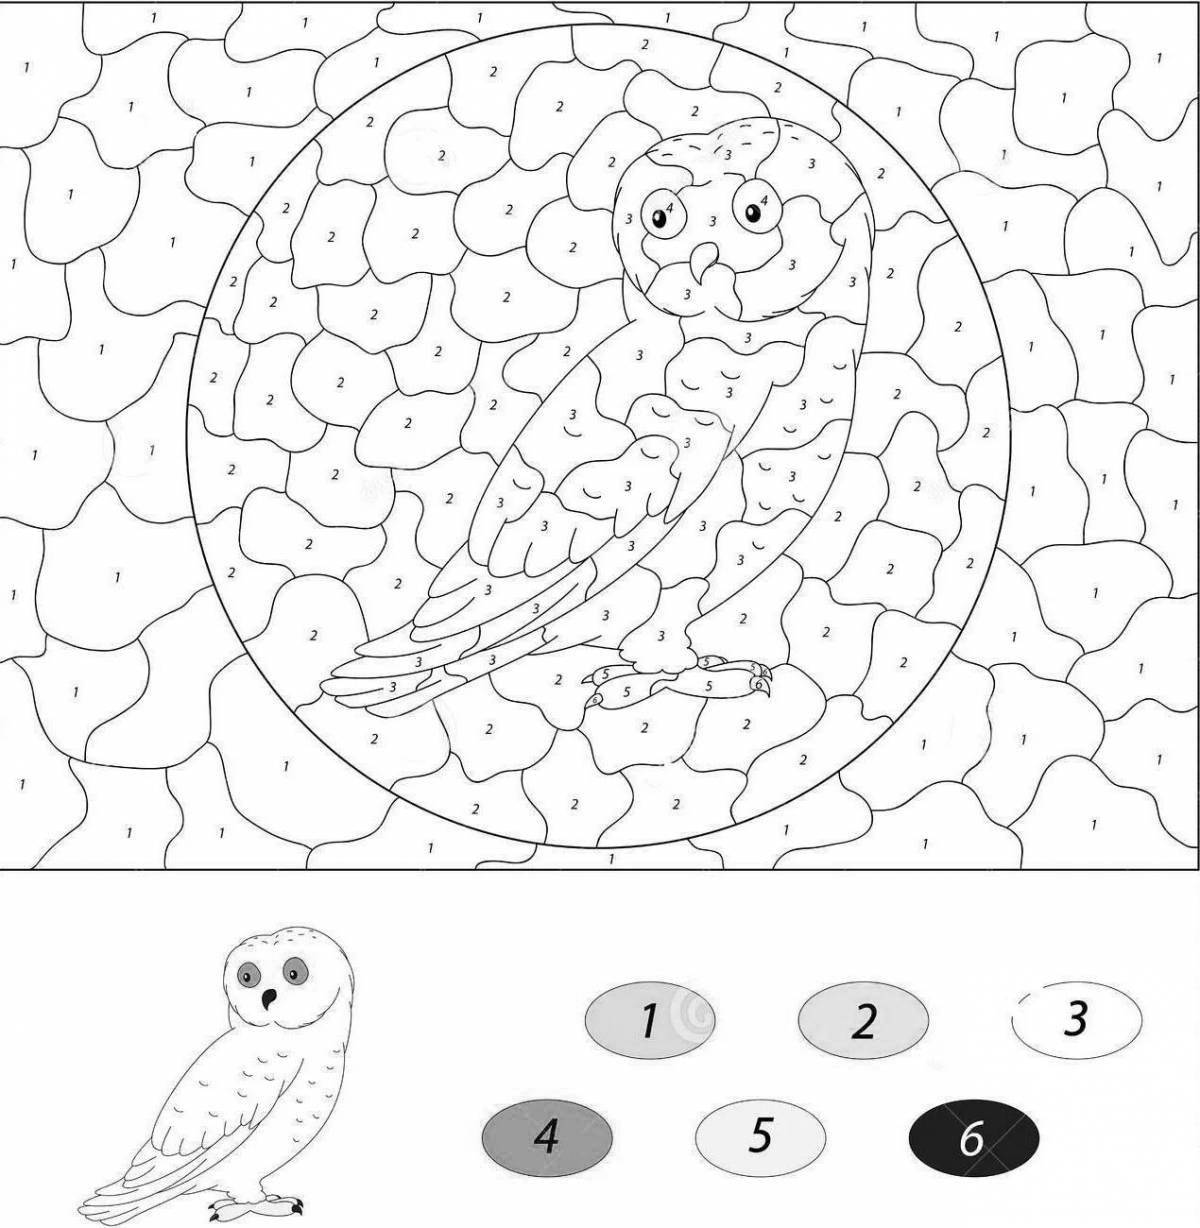 Owl by numbers #2